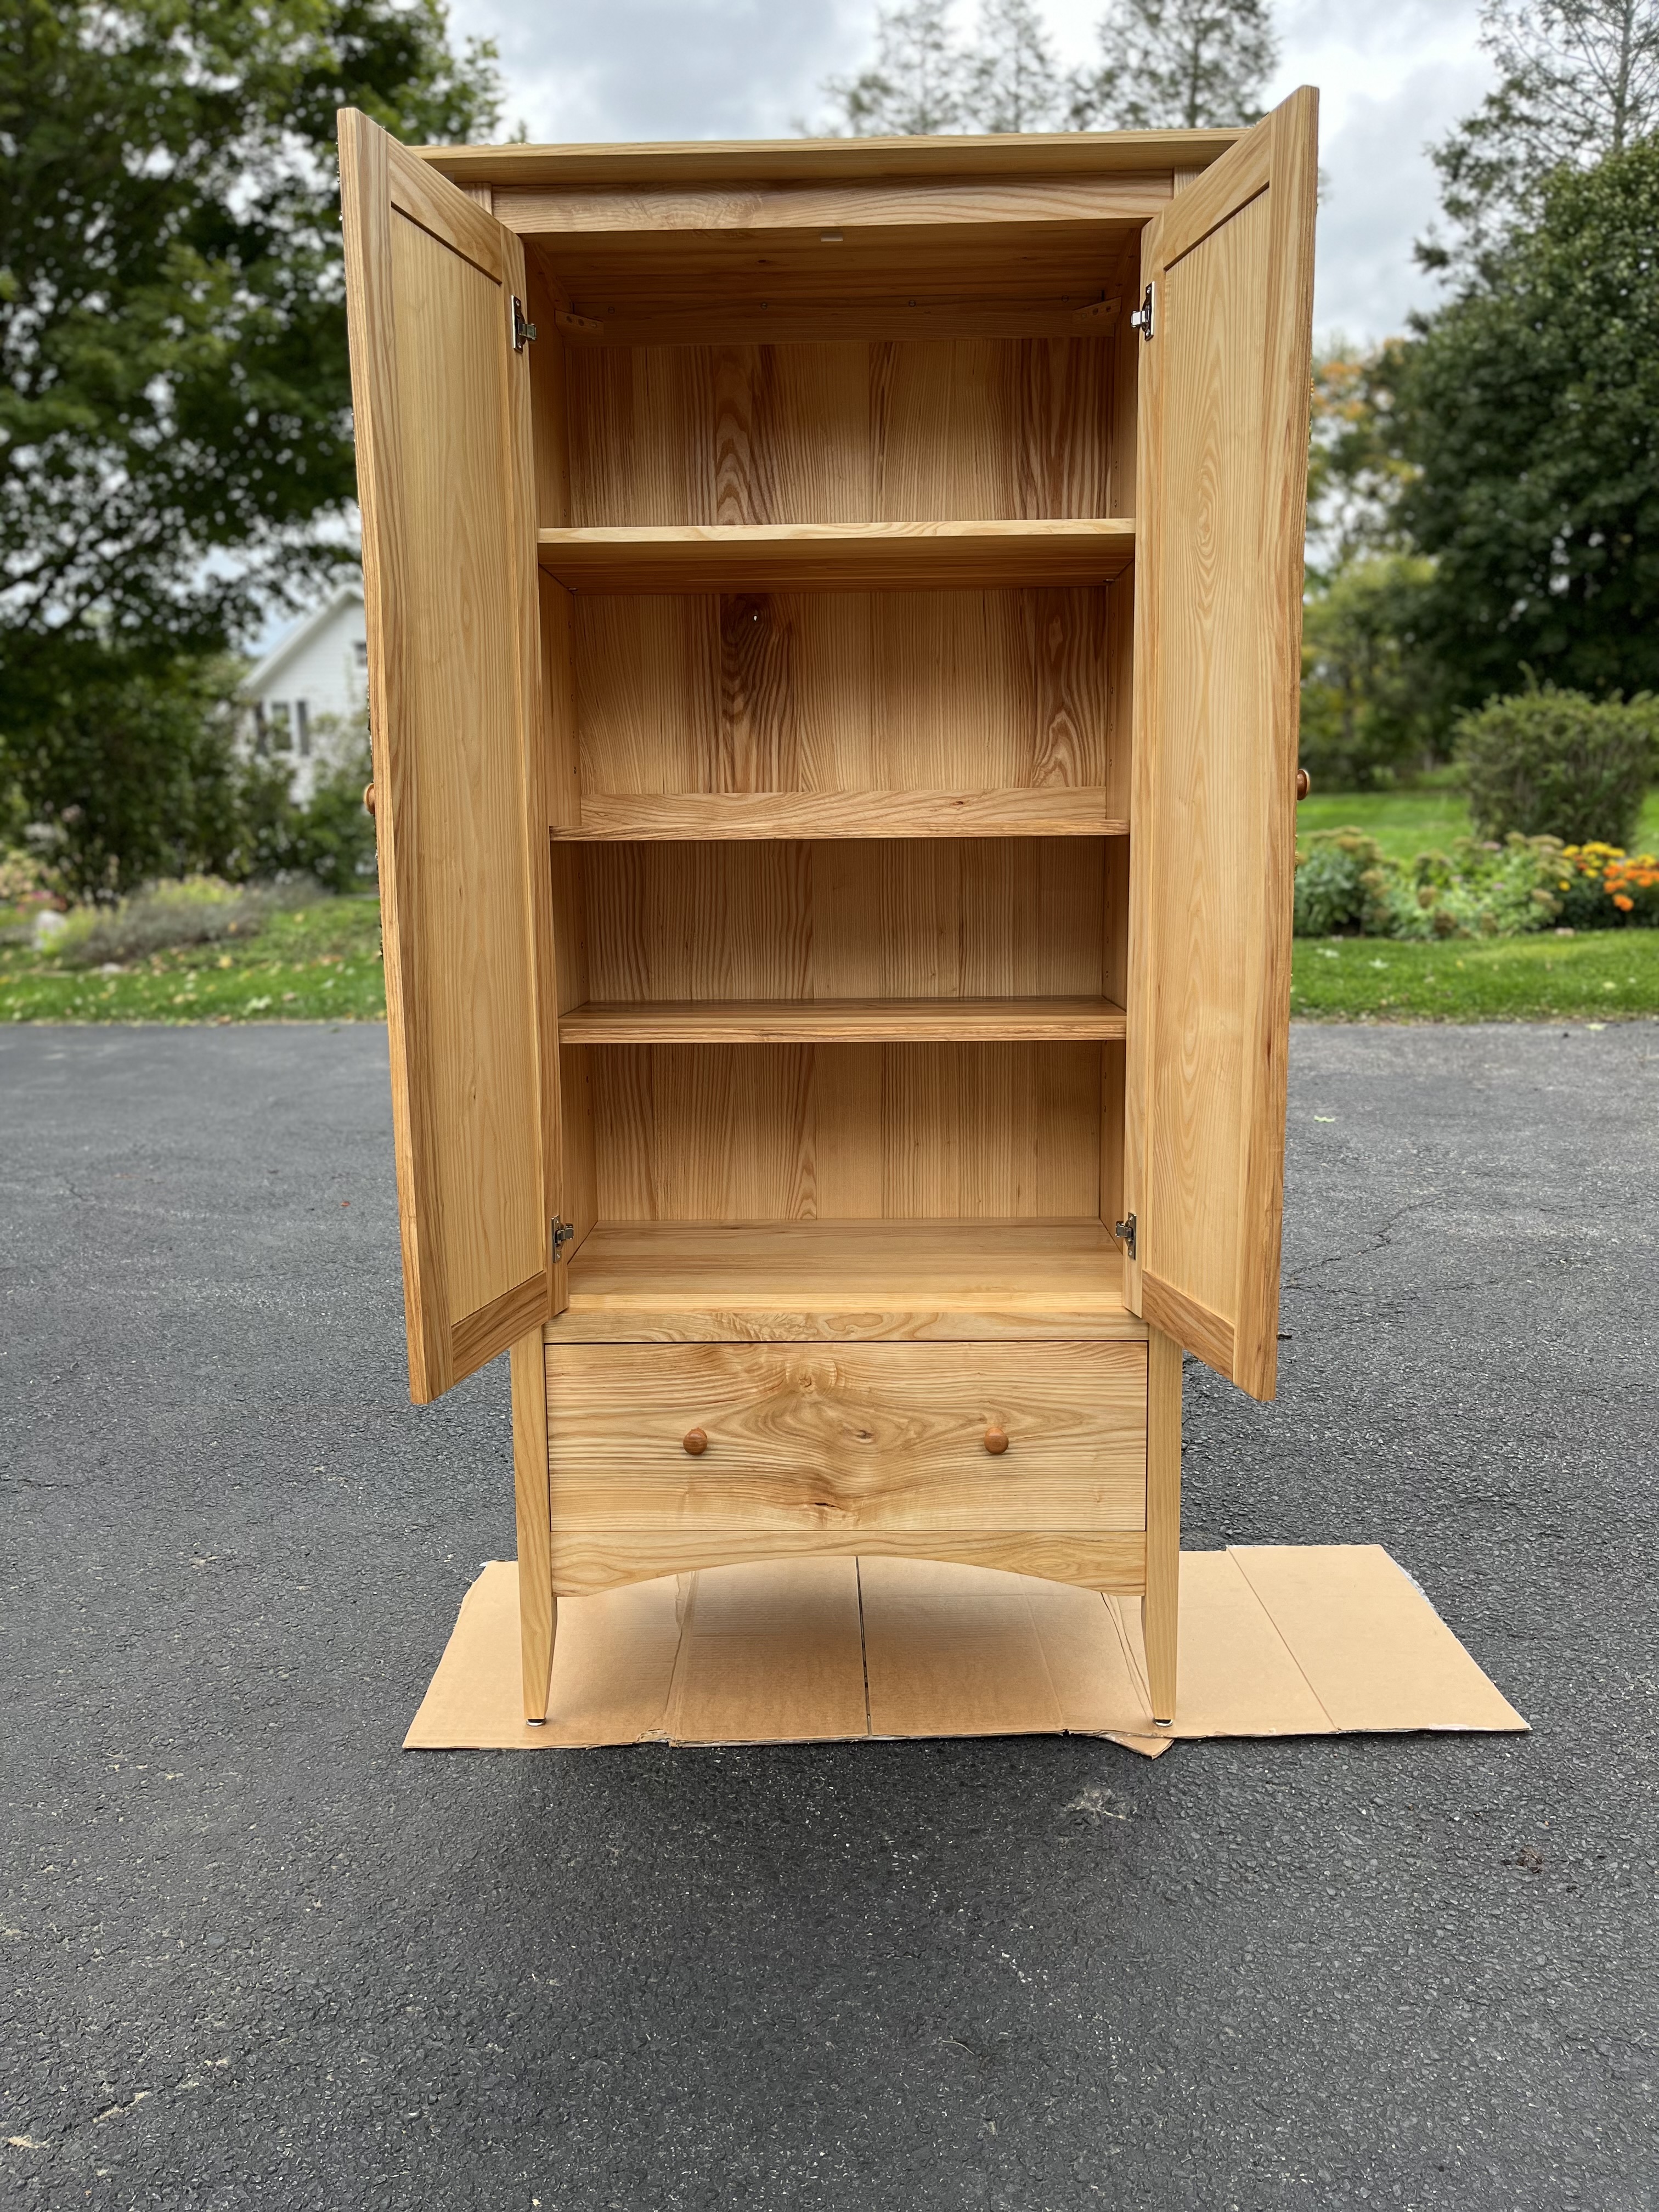 A shaker-style armoire made of ash